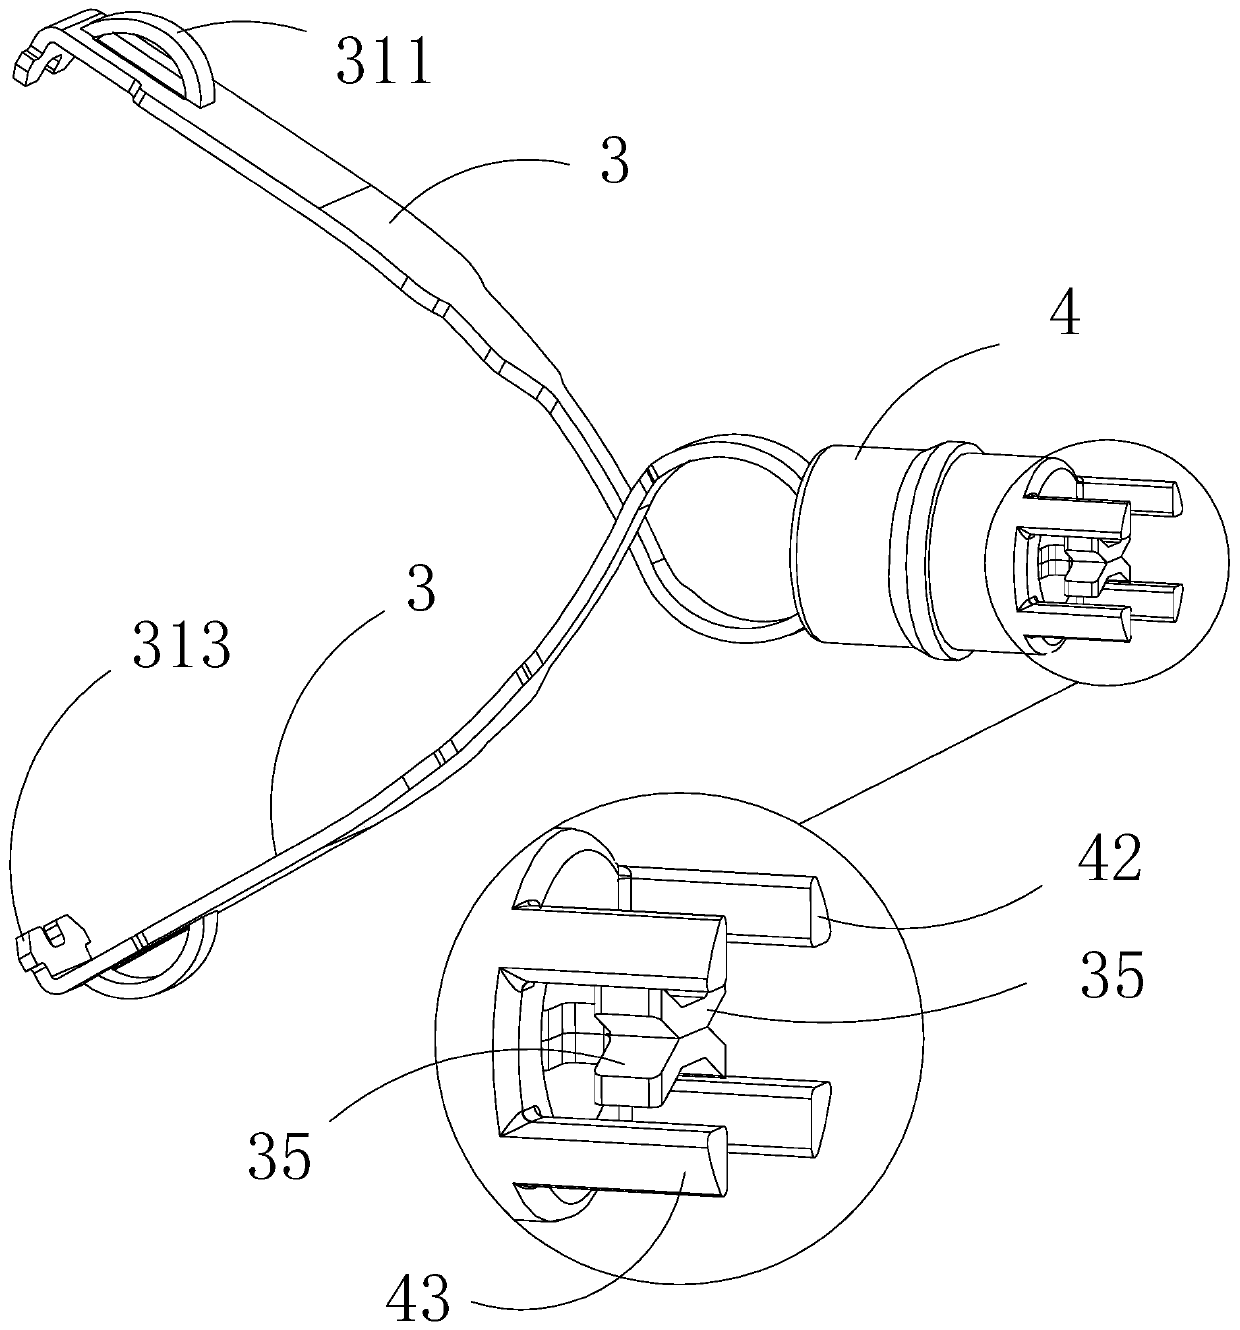 Hemostatic clip of continuous-pushing structure